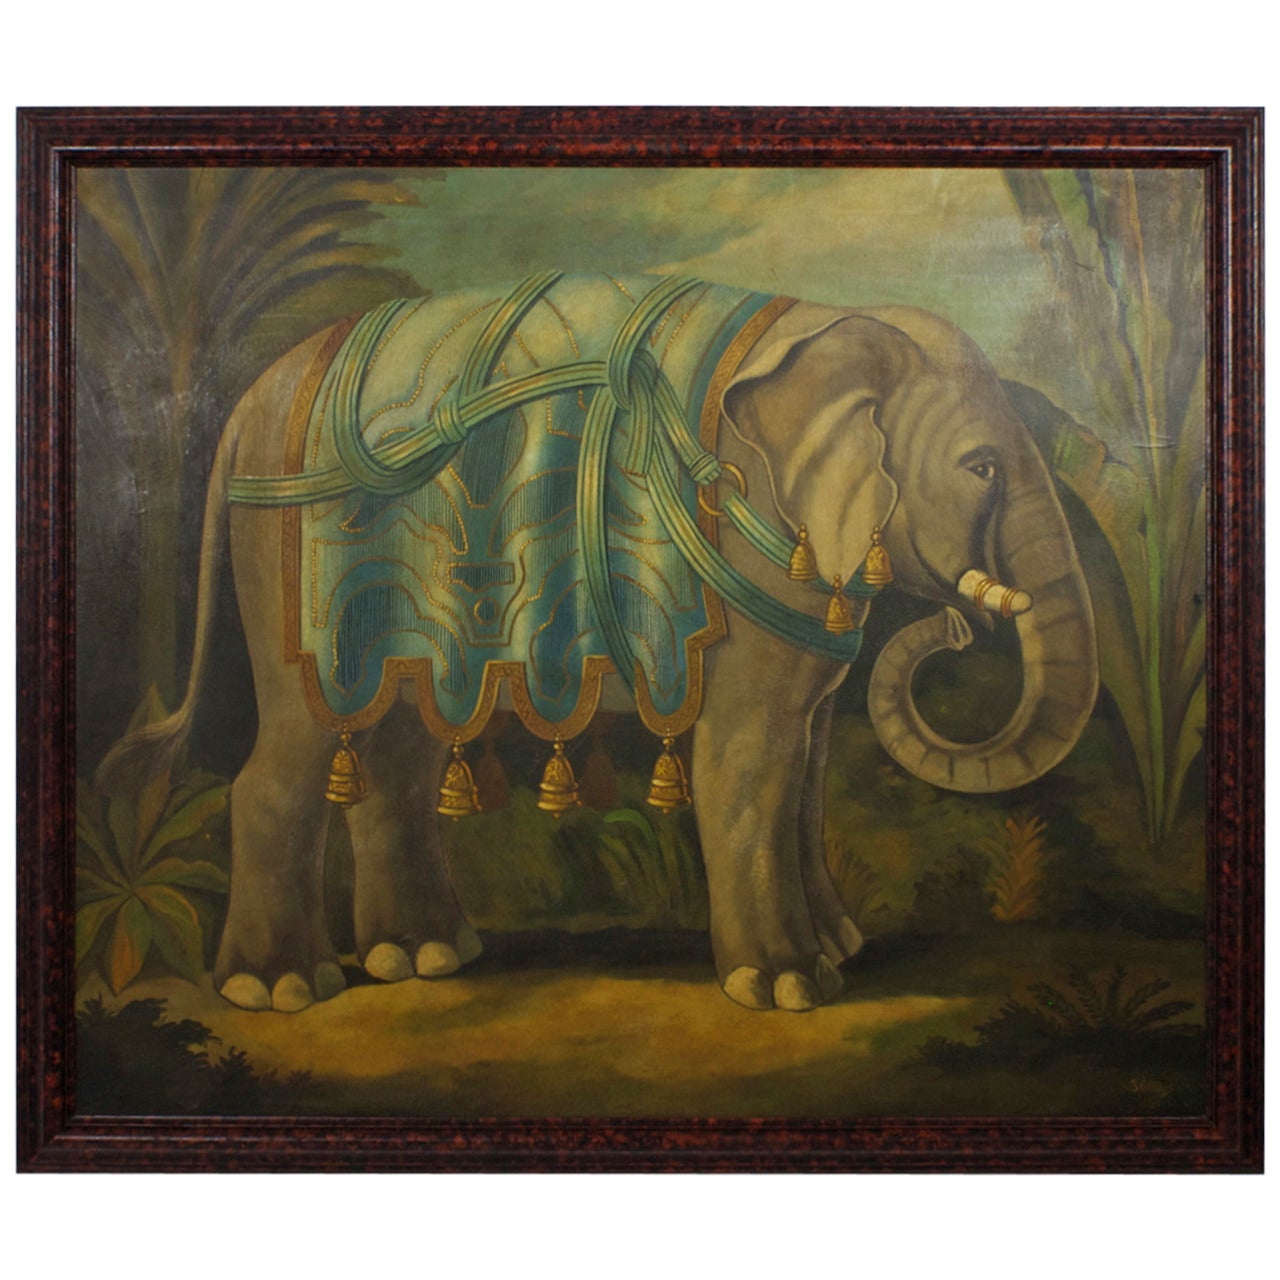 Large Oil on Canvas Painting of an Attired Elephant Signed Skilling